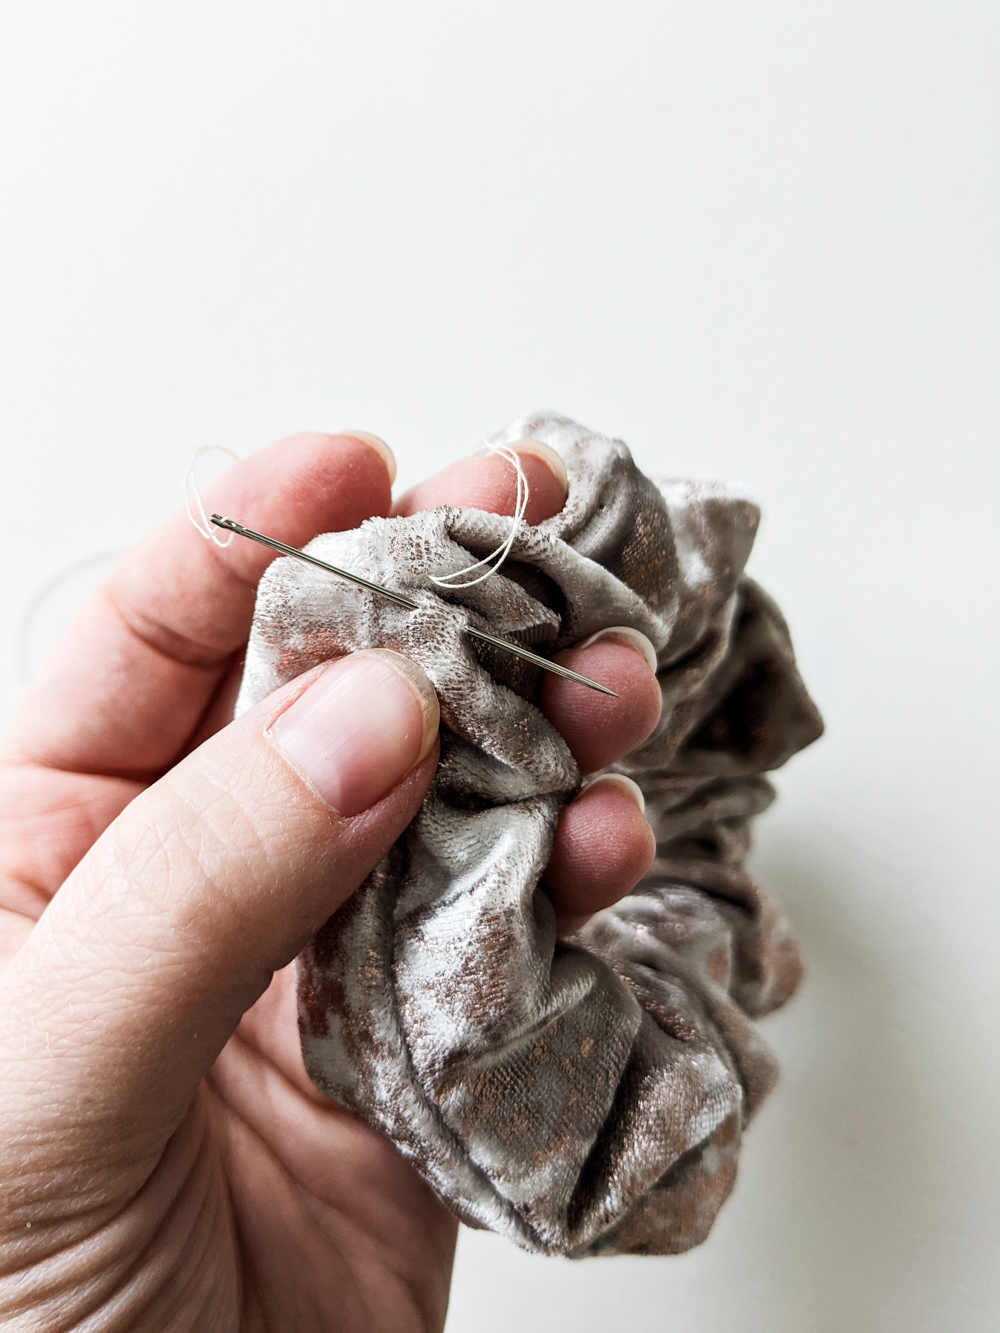 This quick and easy DIY scrunchie tutorial walks you through the simple steps of making a one-of-a-kind scrunchie